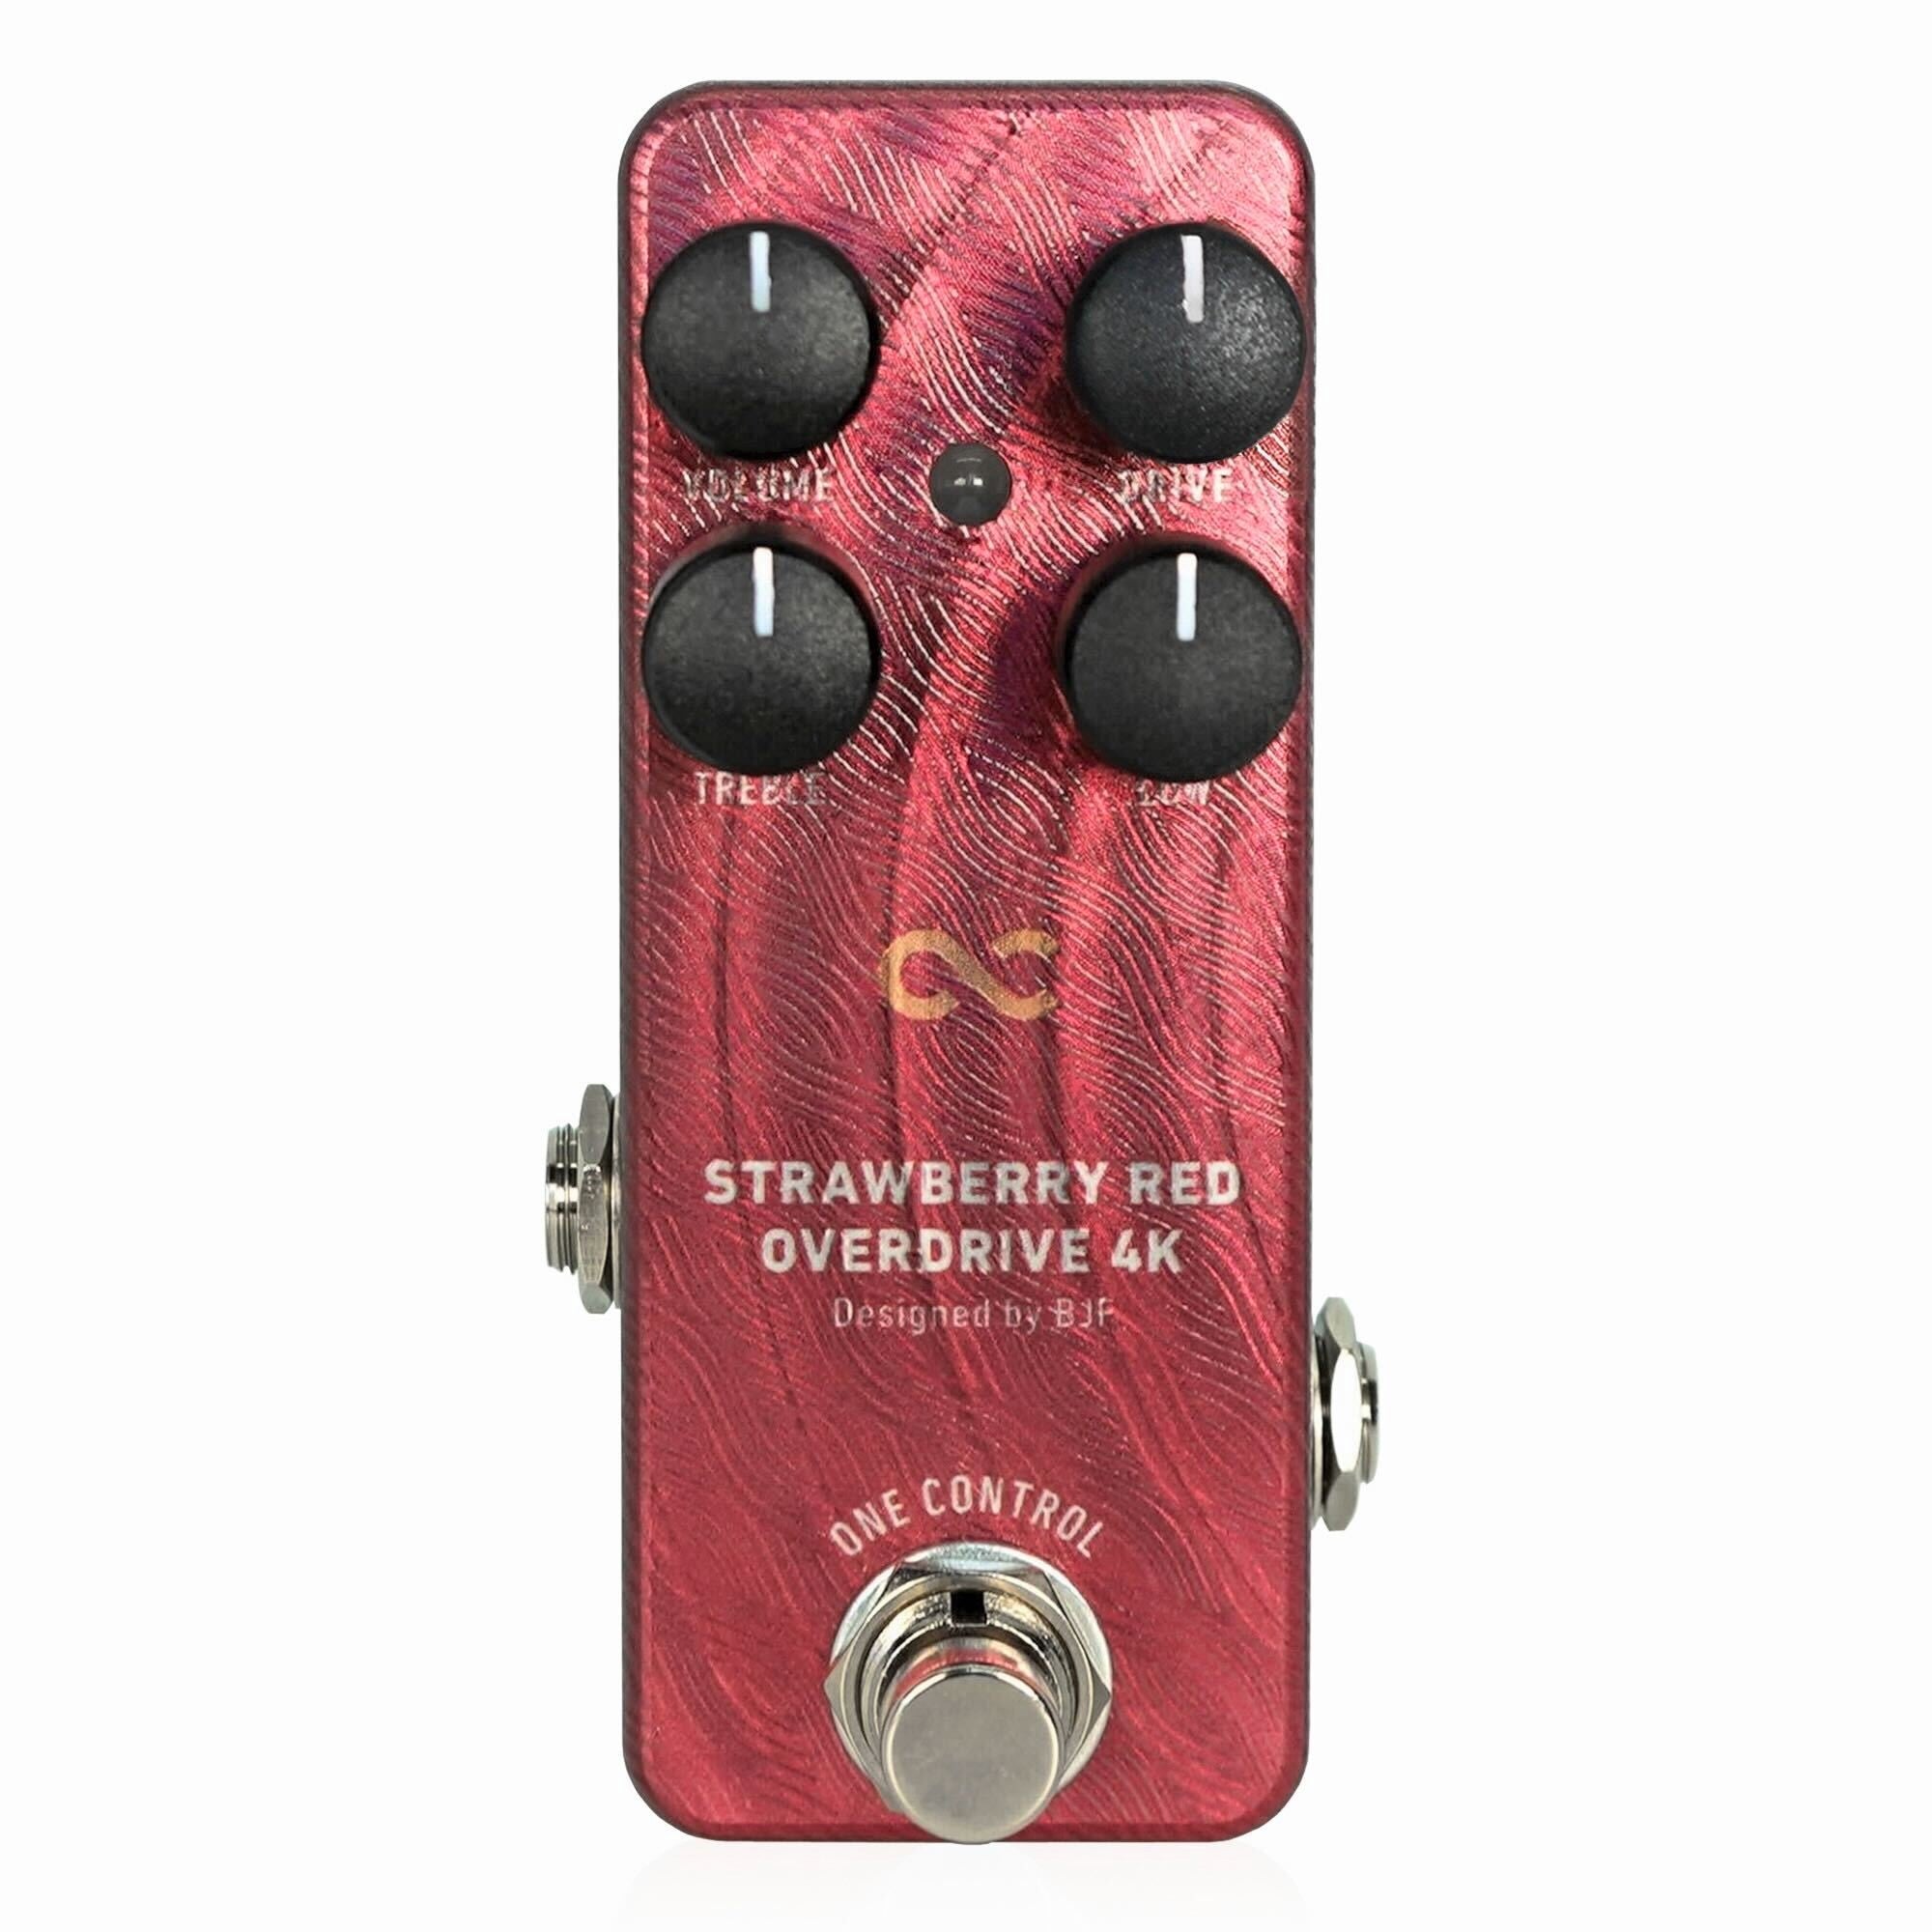 One　–　RED　OVERDRIVE　Control　OneControl　STRAWBERRY　4K